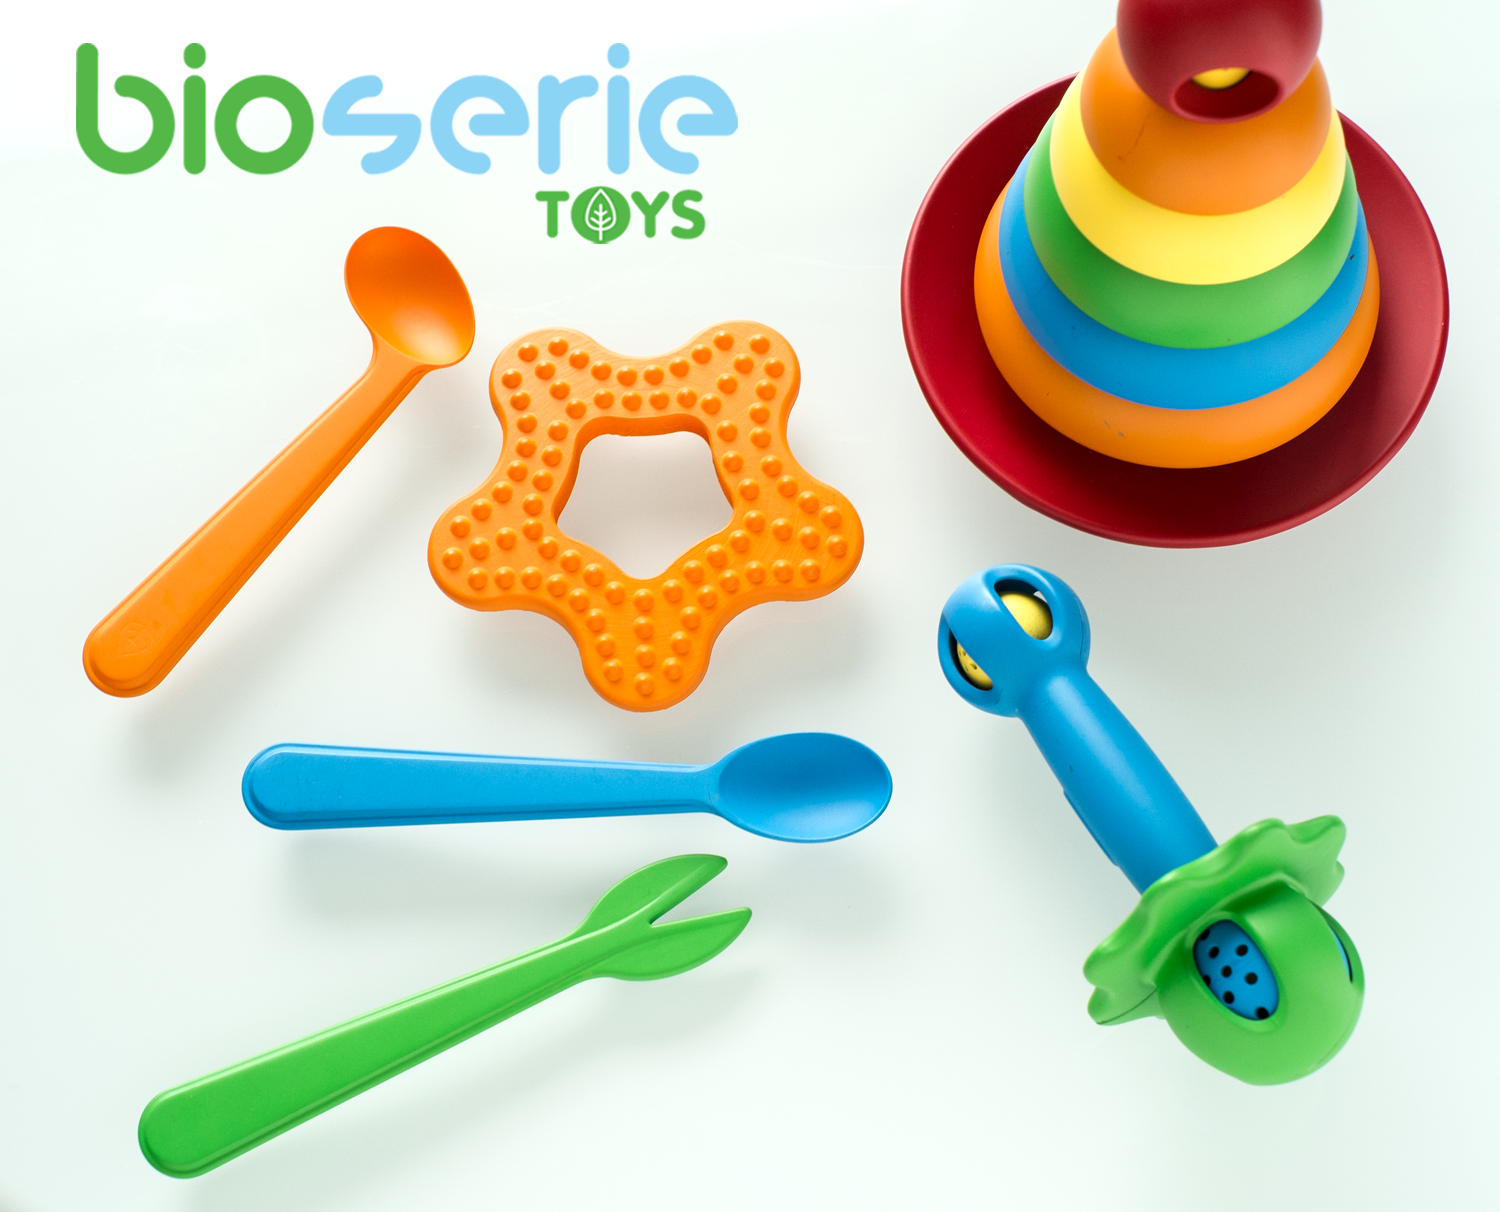 A new line of plastic kids toys made from sugar and corn!